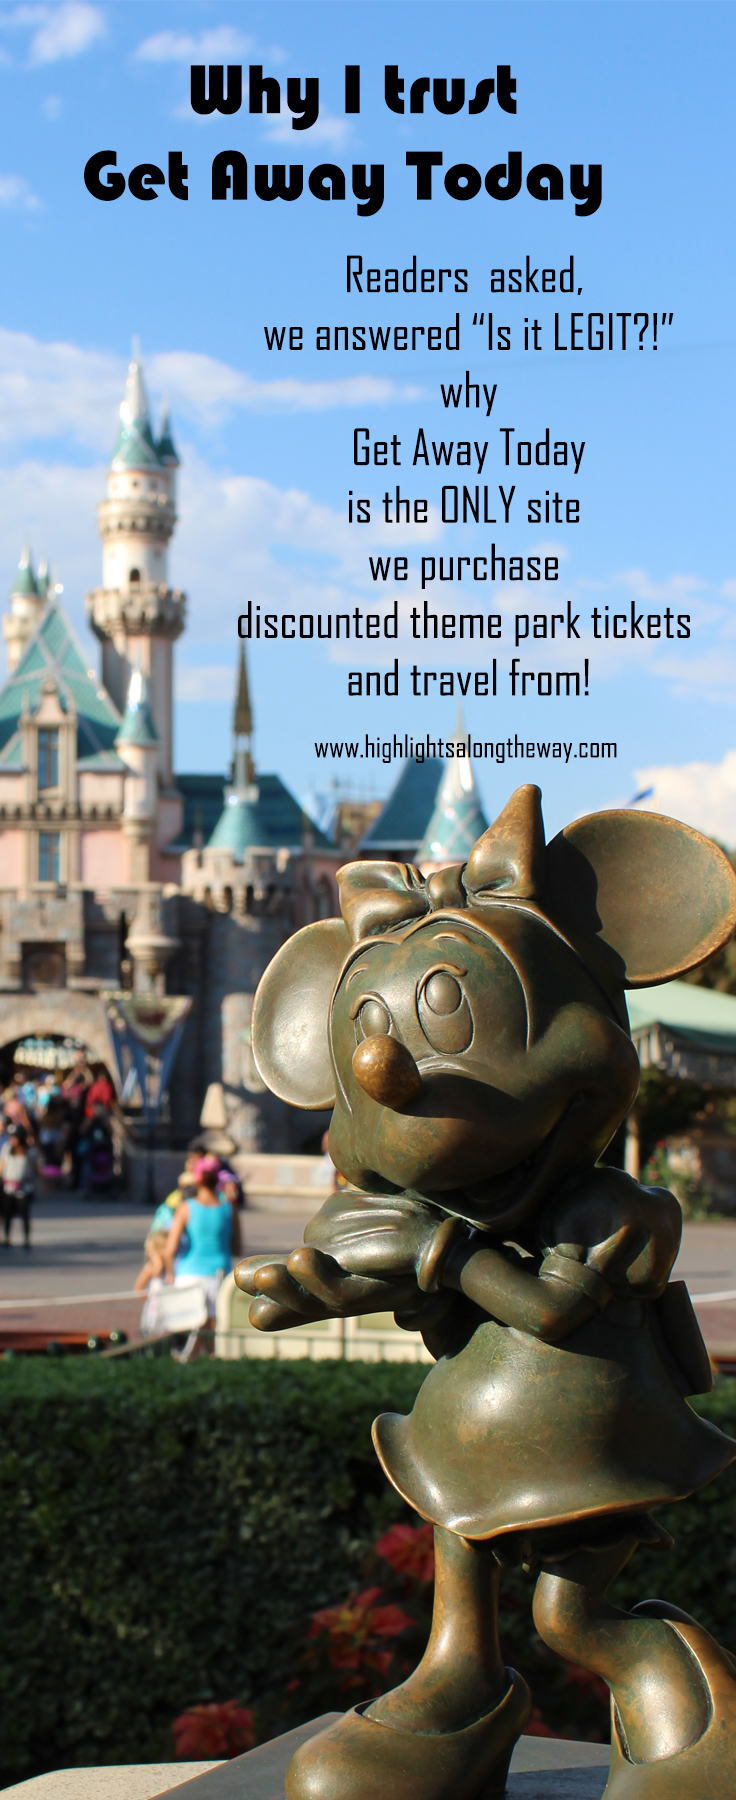 is get away today legit for discounted disneyland tickets